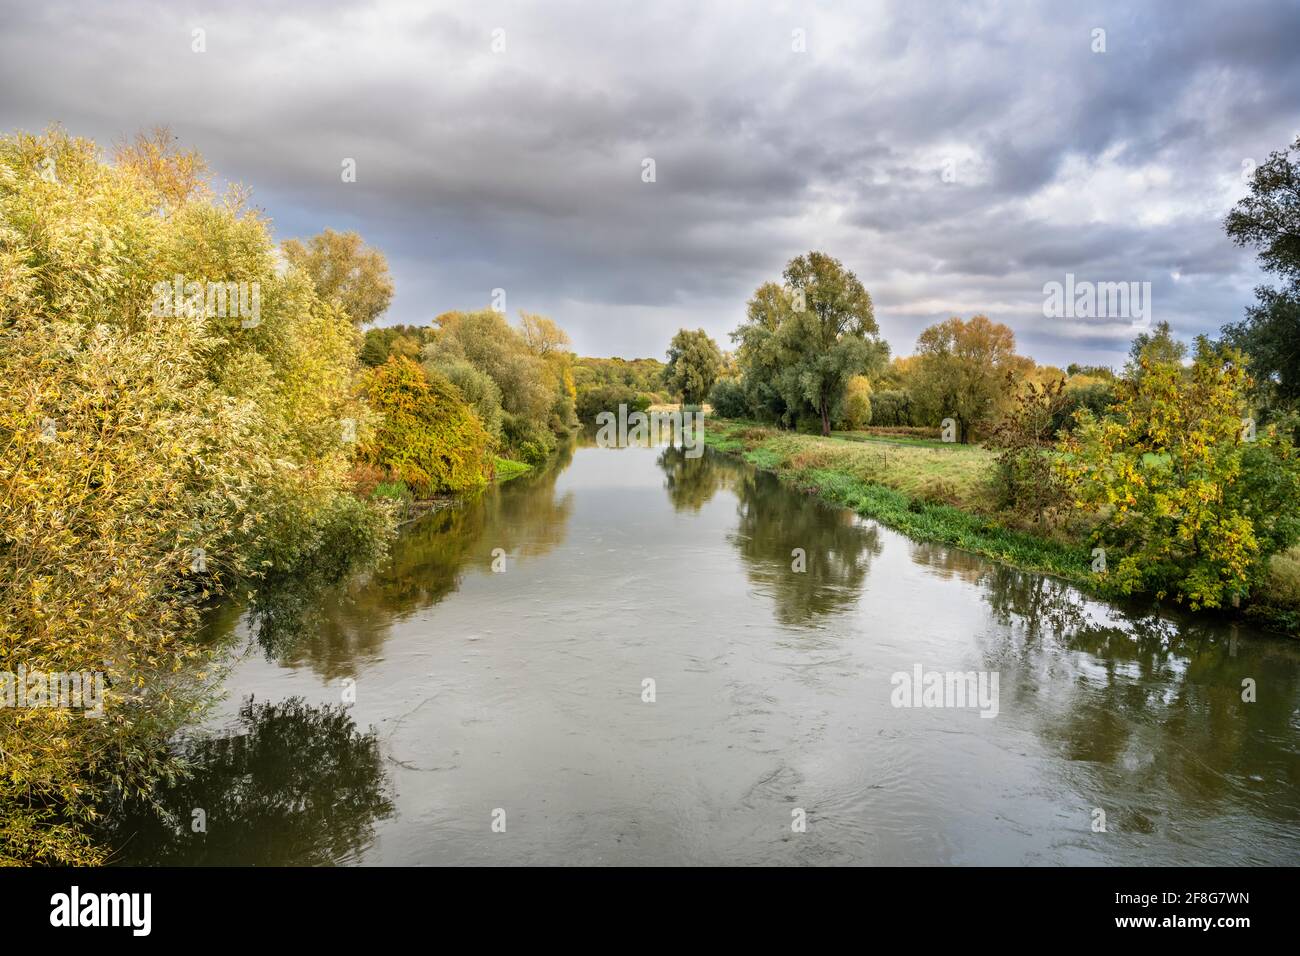 The River Nene with high water levels after heavy rain flowing through woodland near Peterborough, Cambridgeshire, England Stock Photo